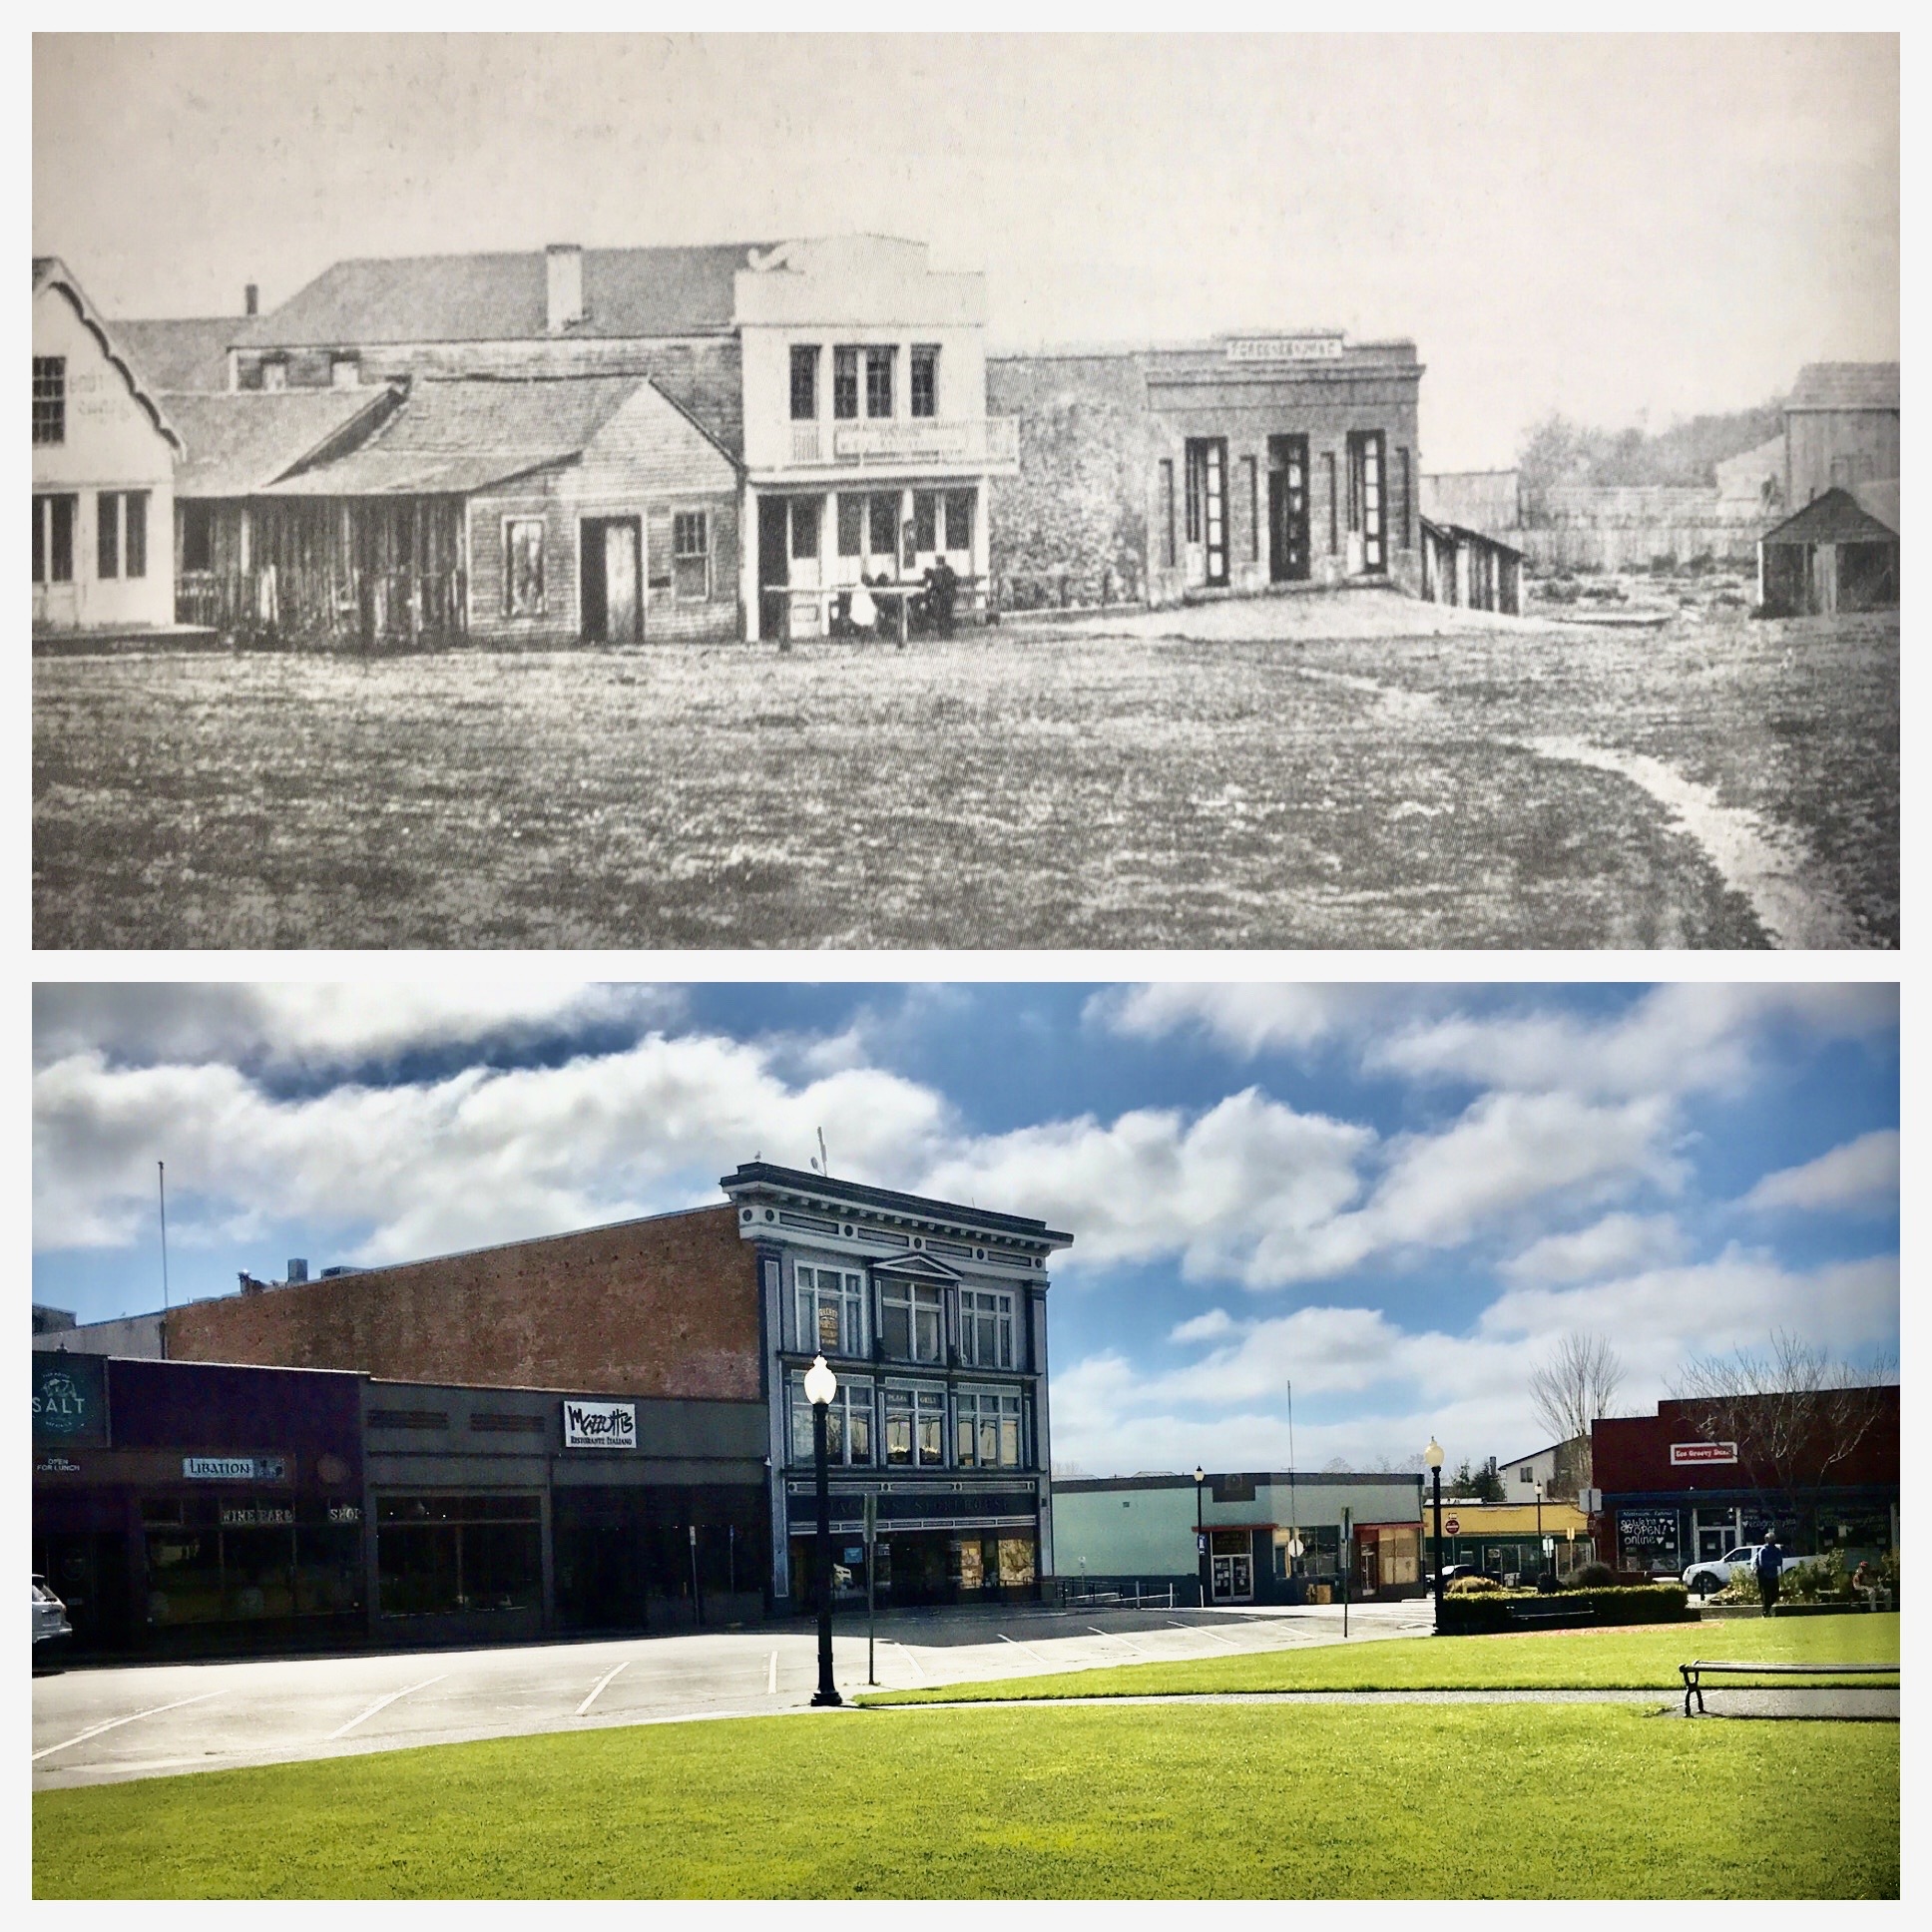 Then and Now image 1